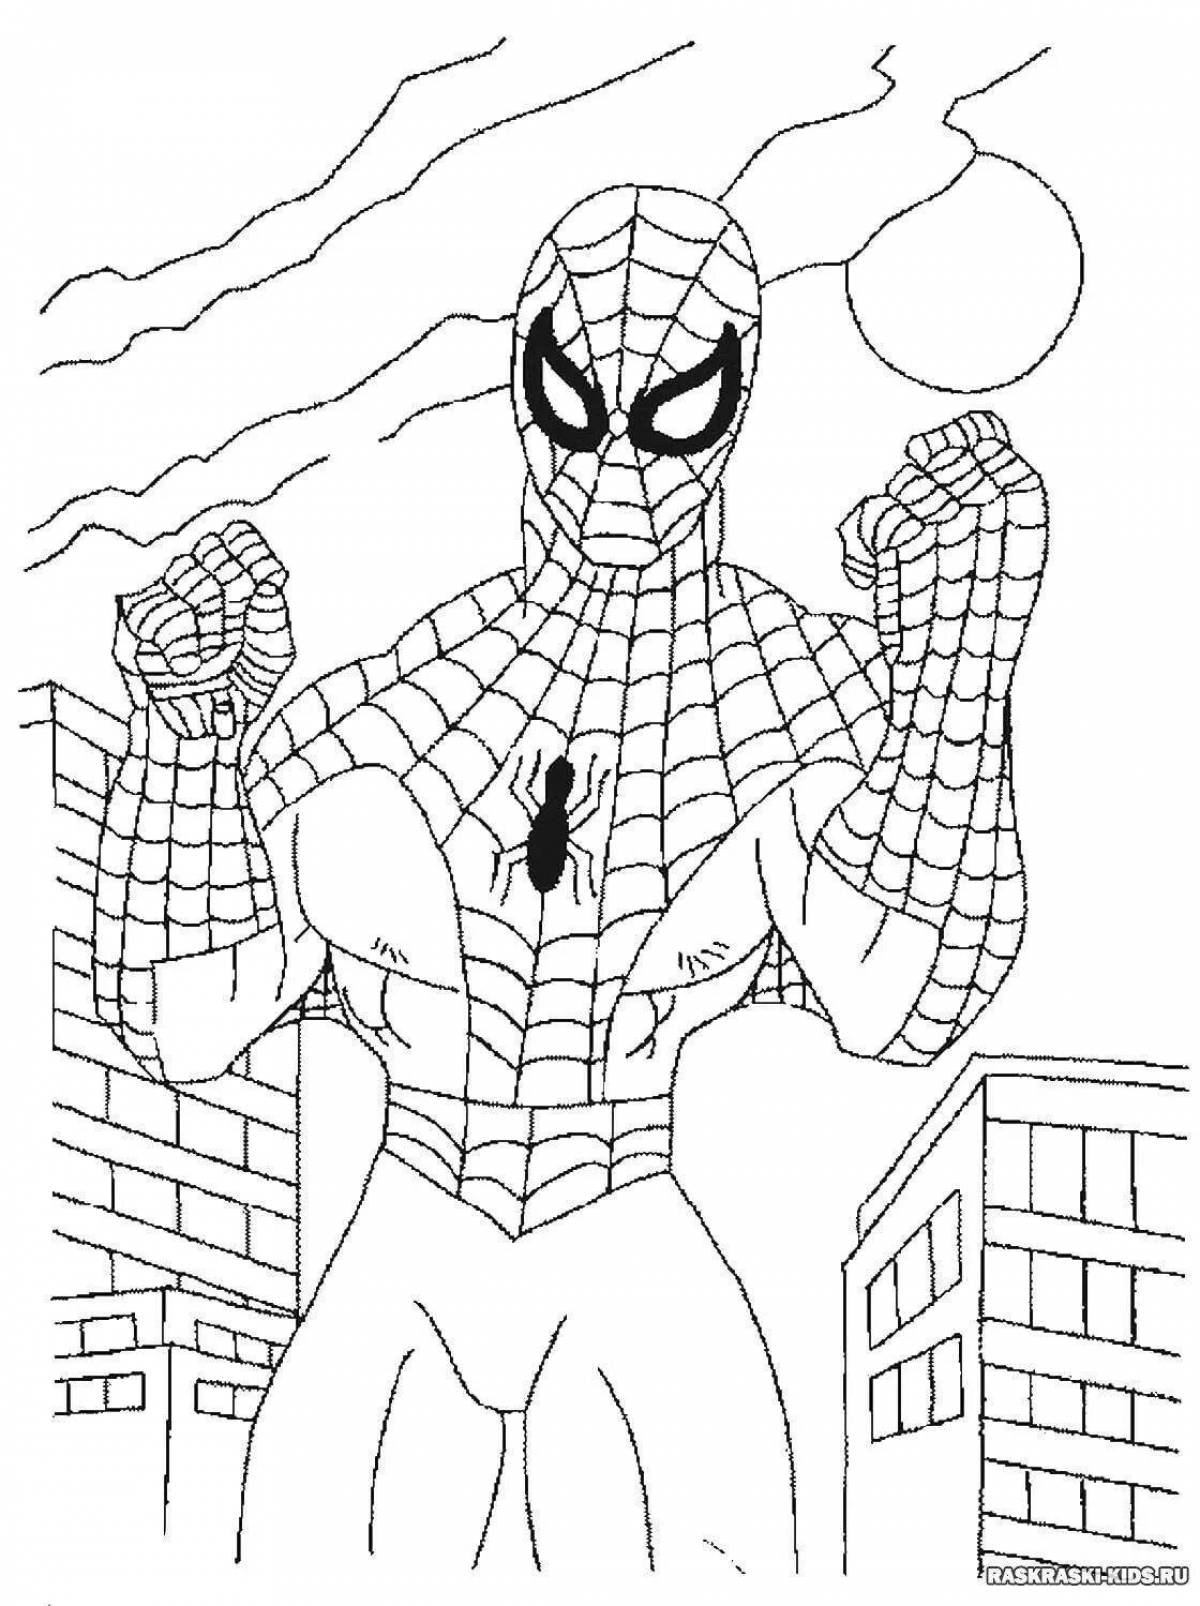 Playful spiderman coloring page for kids